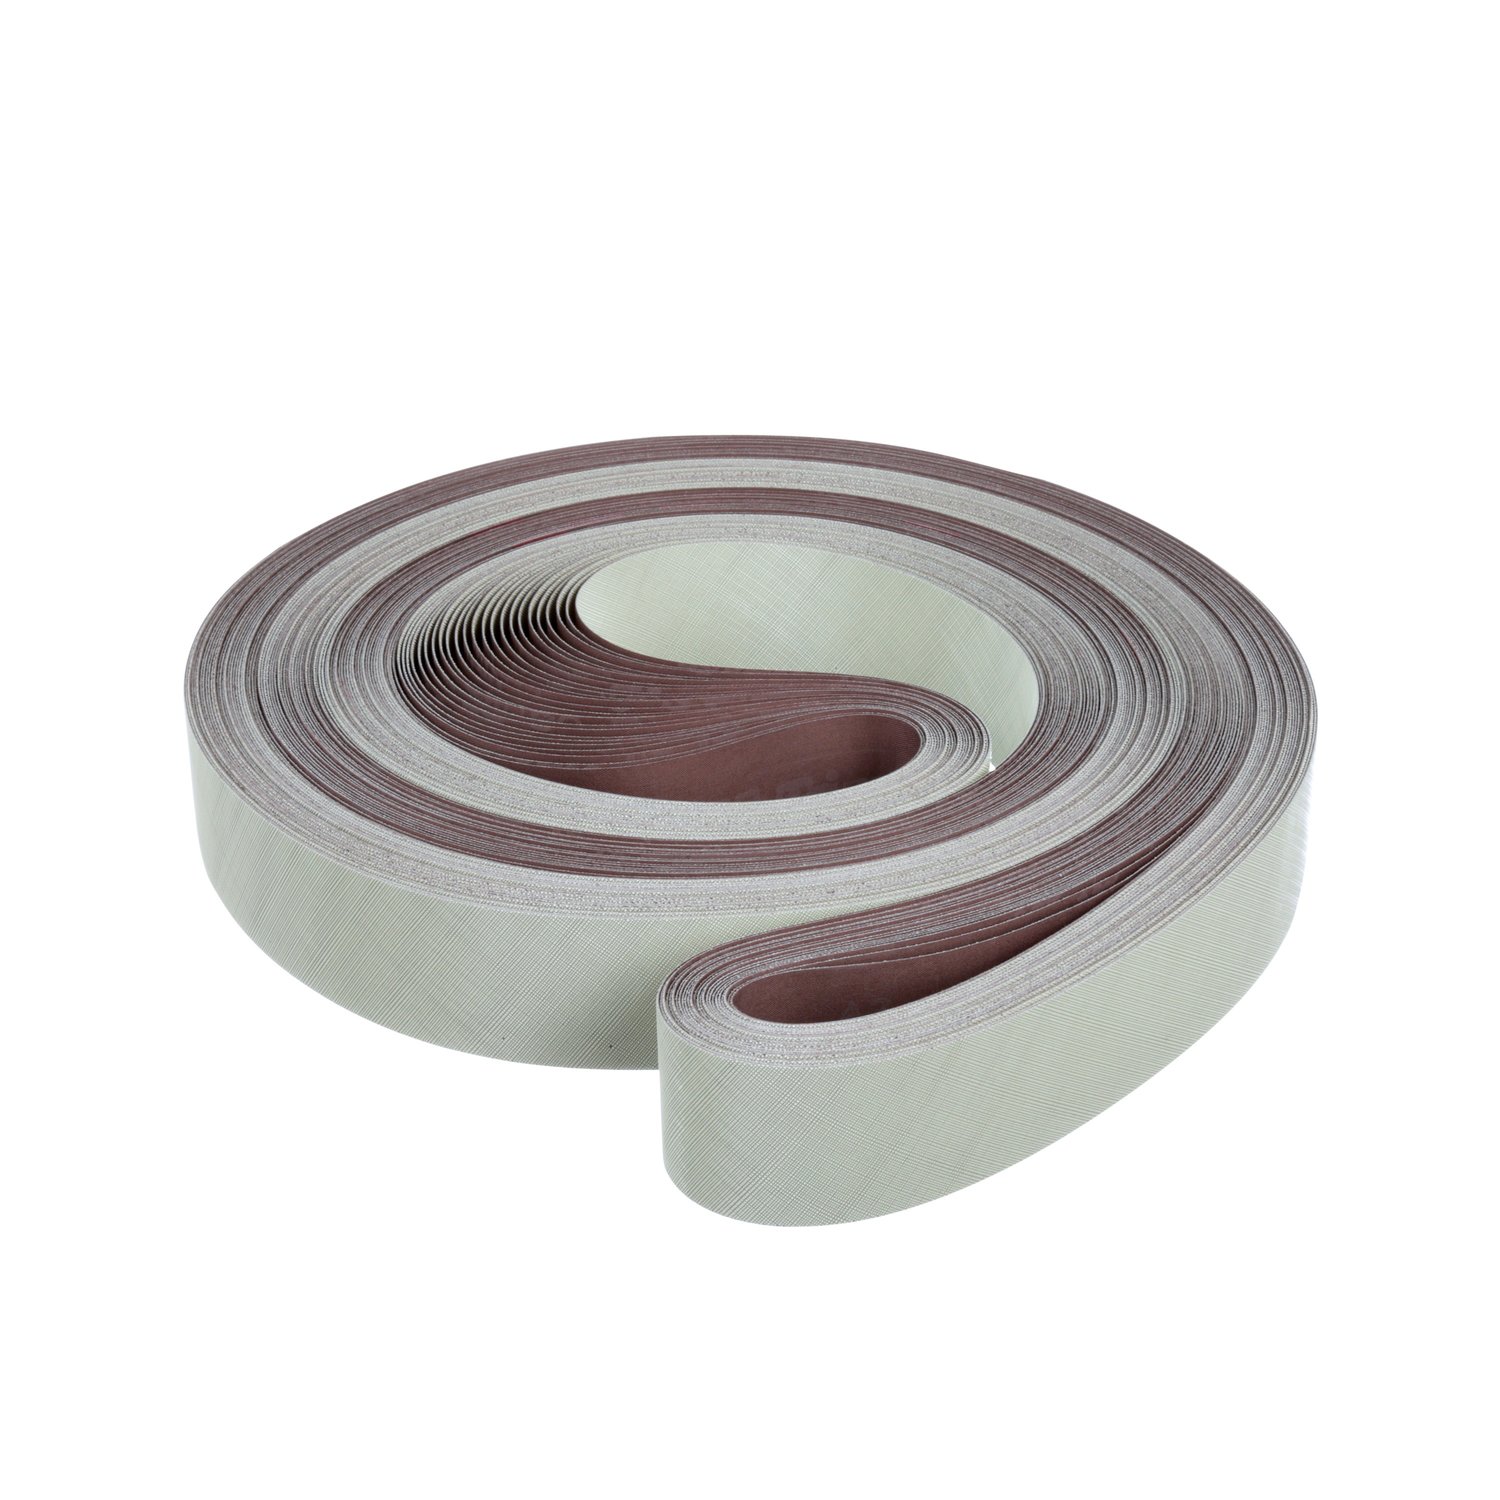 7100047193 - 3M Trizact Cloth Roll 305EA, A5 JE-weight, Config